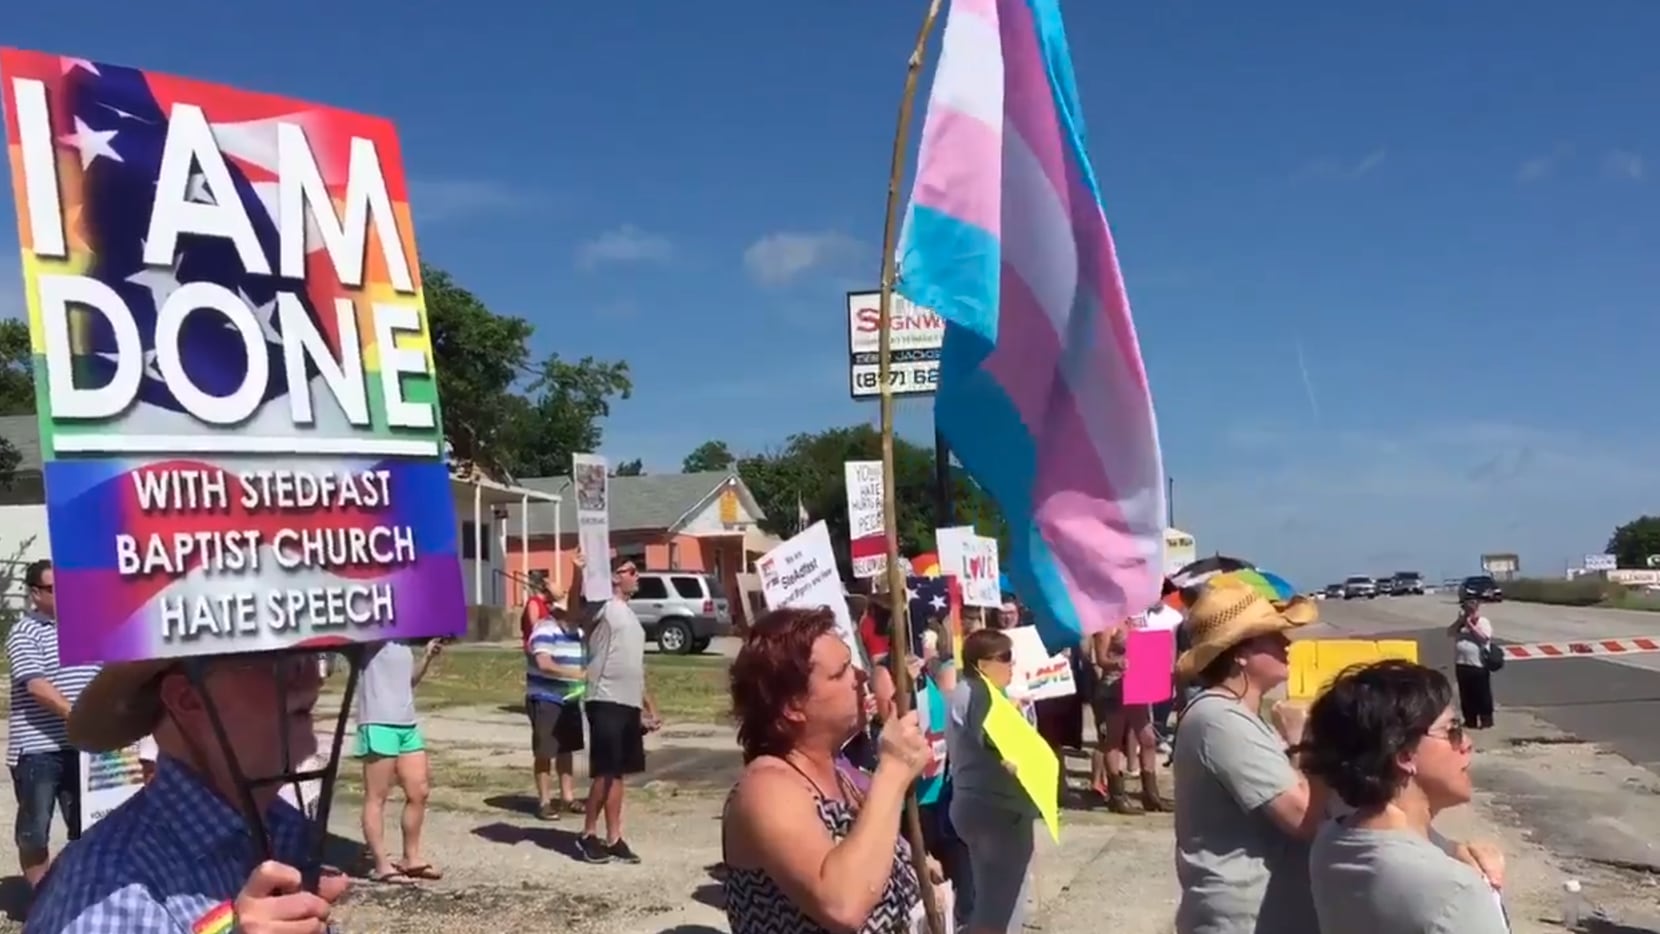 Activists protested Stedfast Baptist Church in 2019. The church moved to Watauga this year...